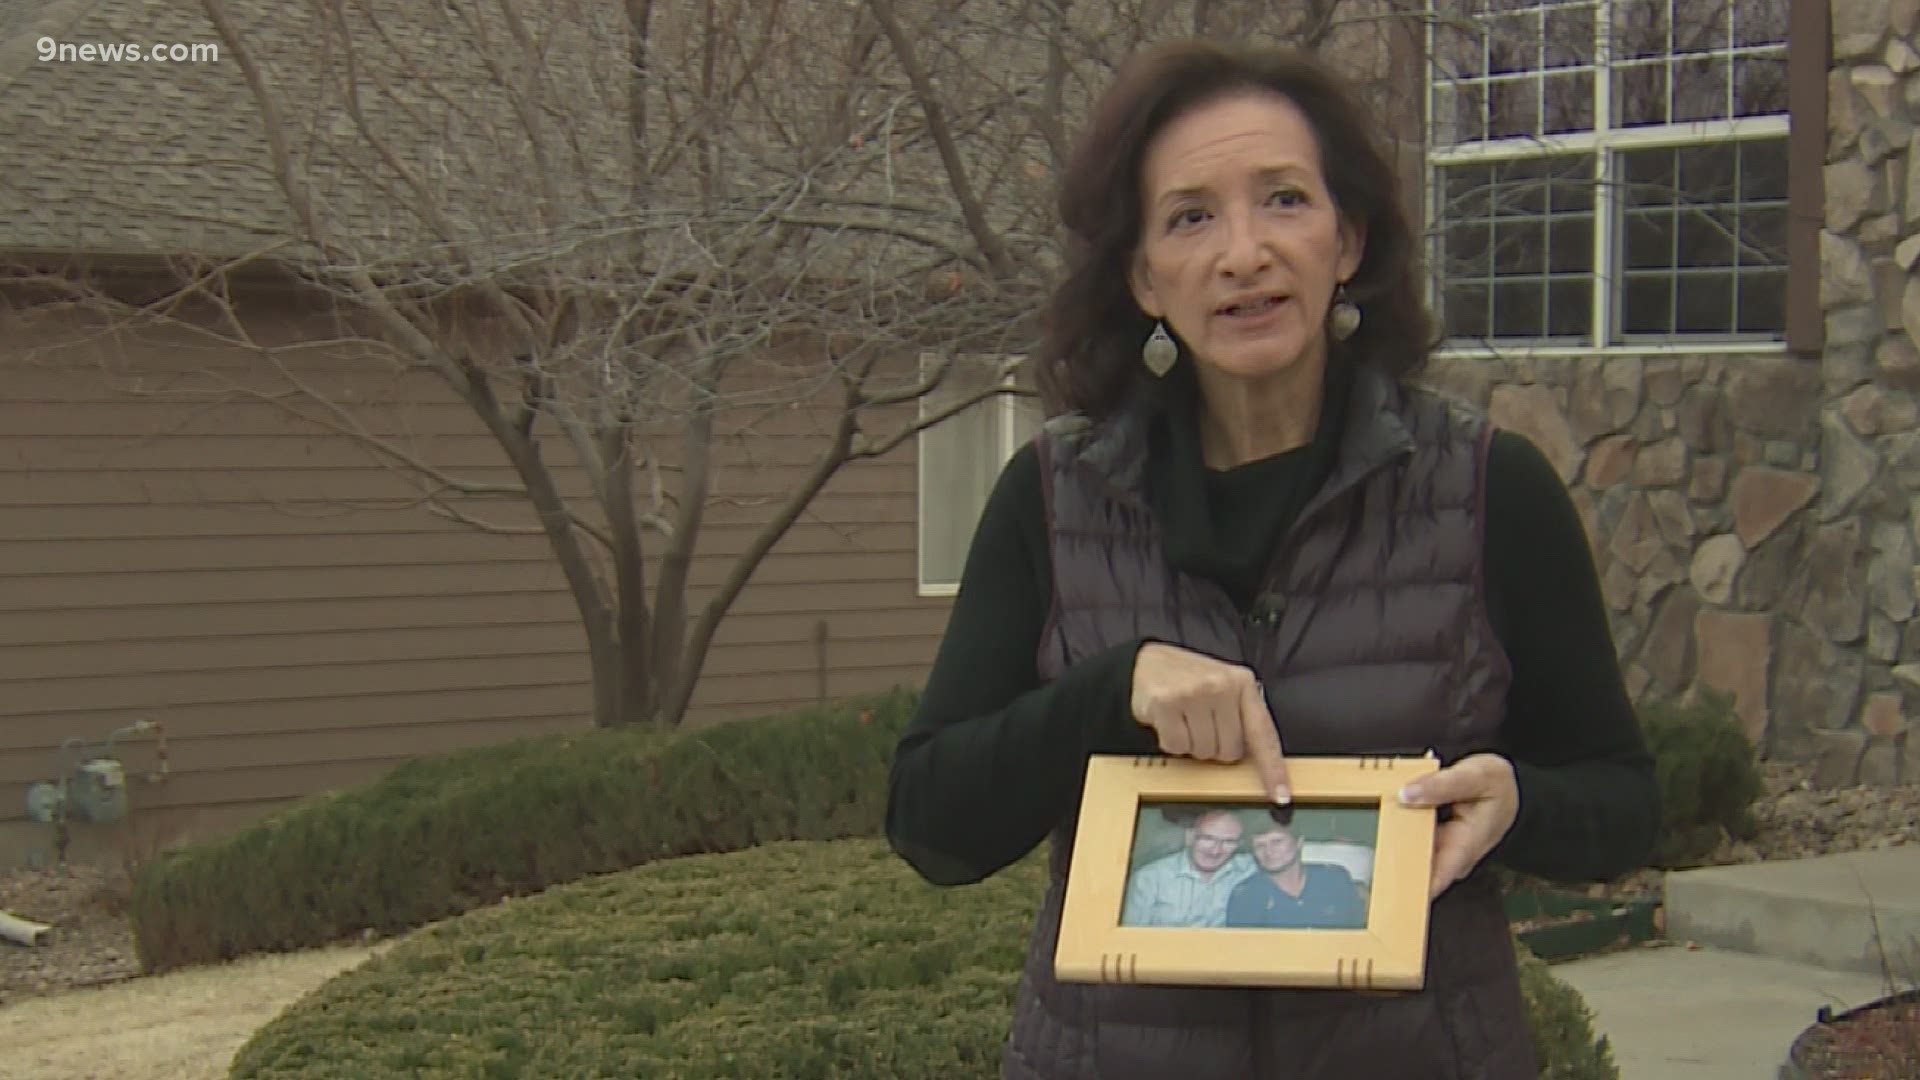 Julie Bartos' parents are 80. Her dad has cancer. Yet, she can't find him a COVID-19 vaccine.